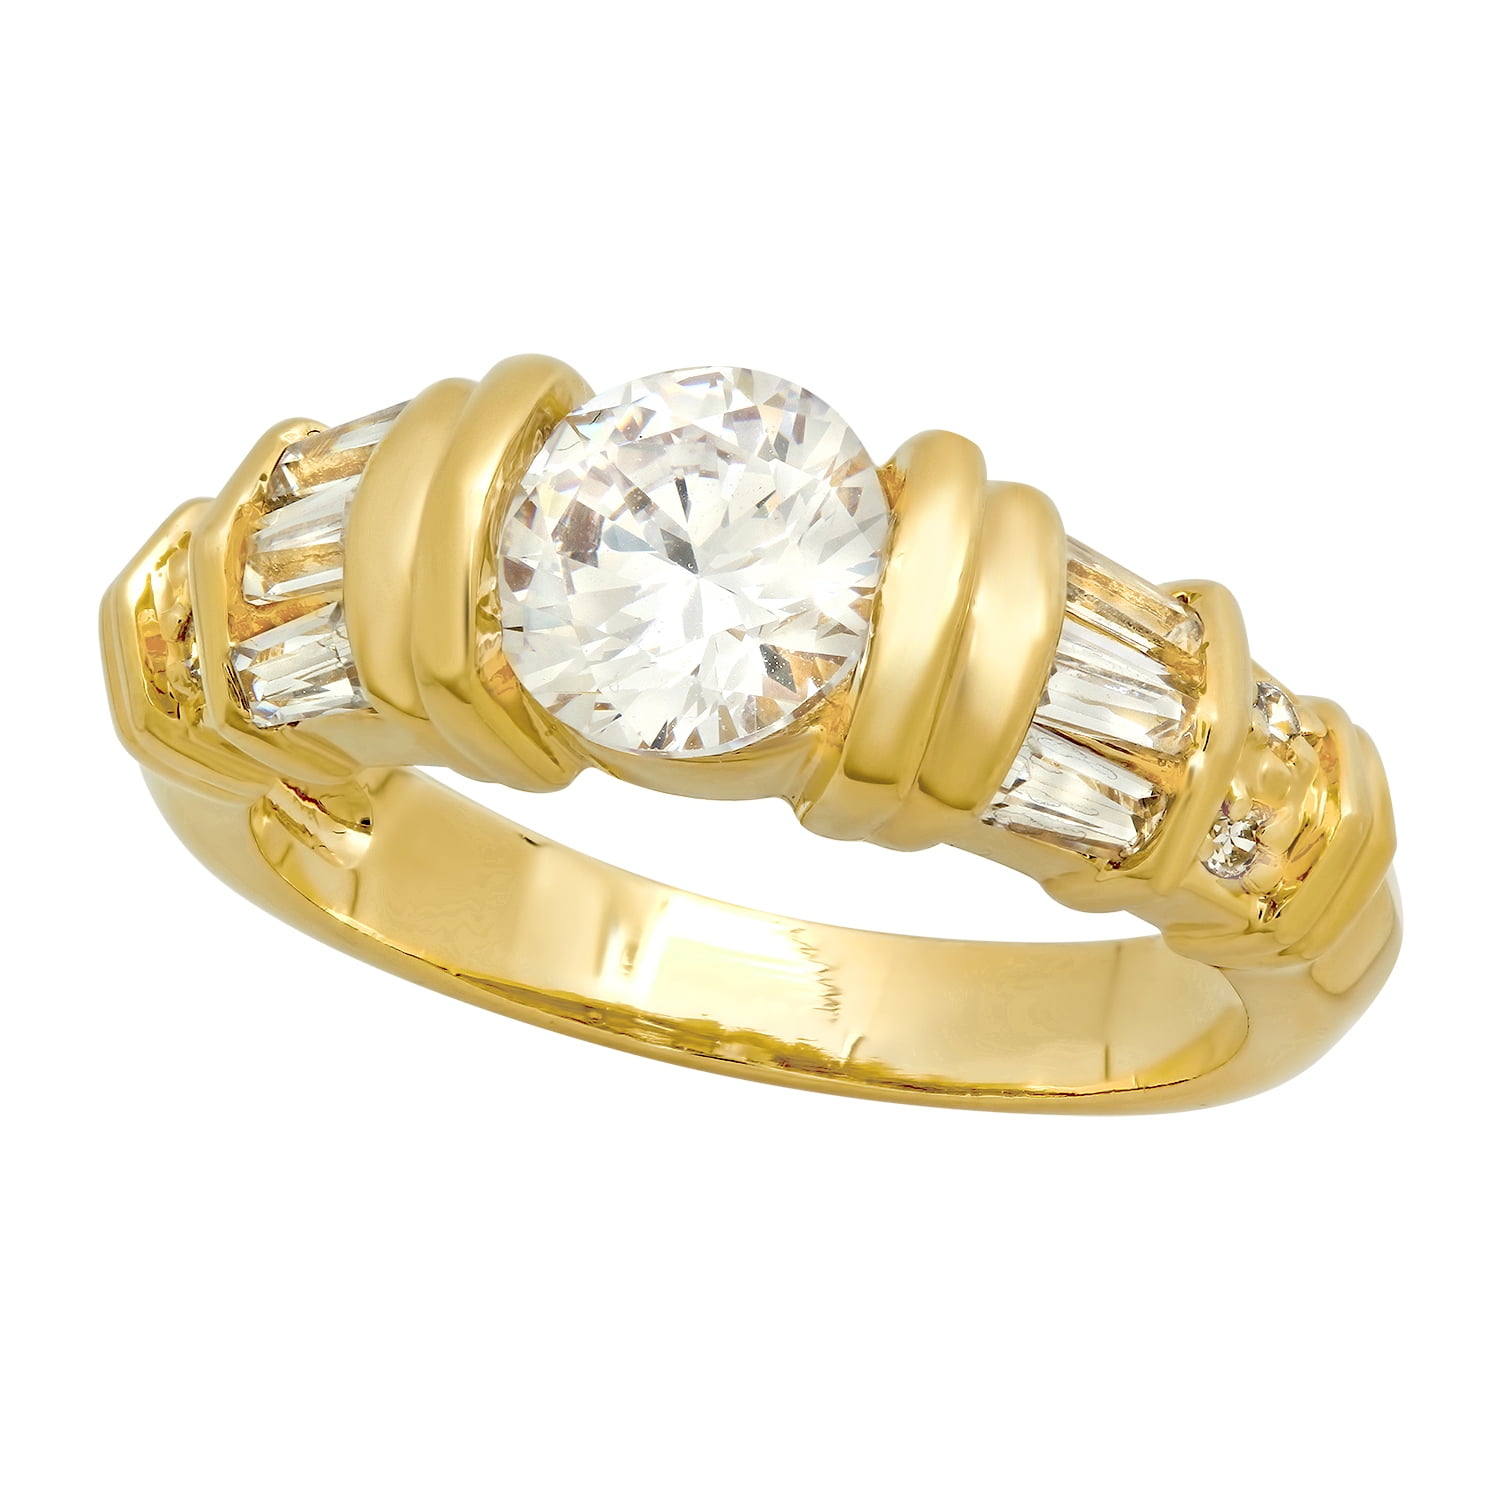 Gold Plated Round CZ Solitaire Ring w/Baguette/Round CZ Accents, Size 9